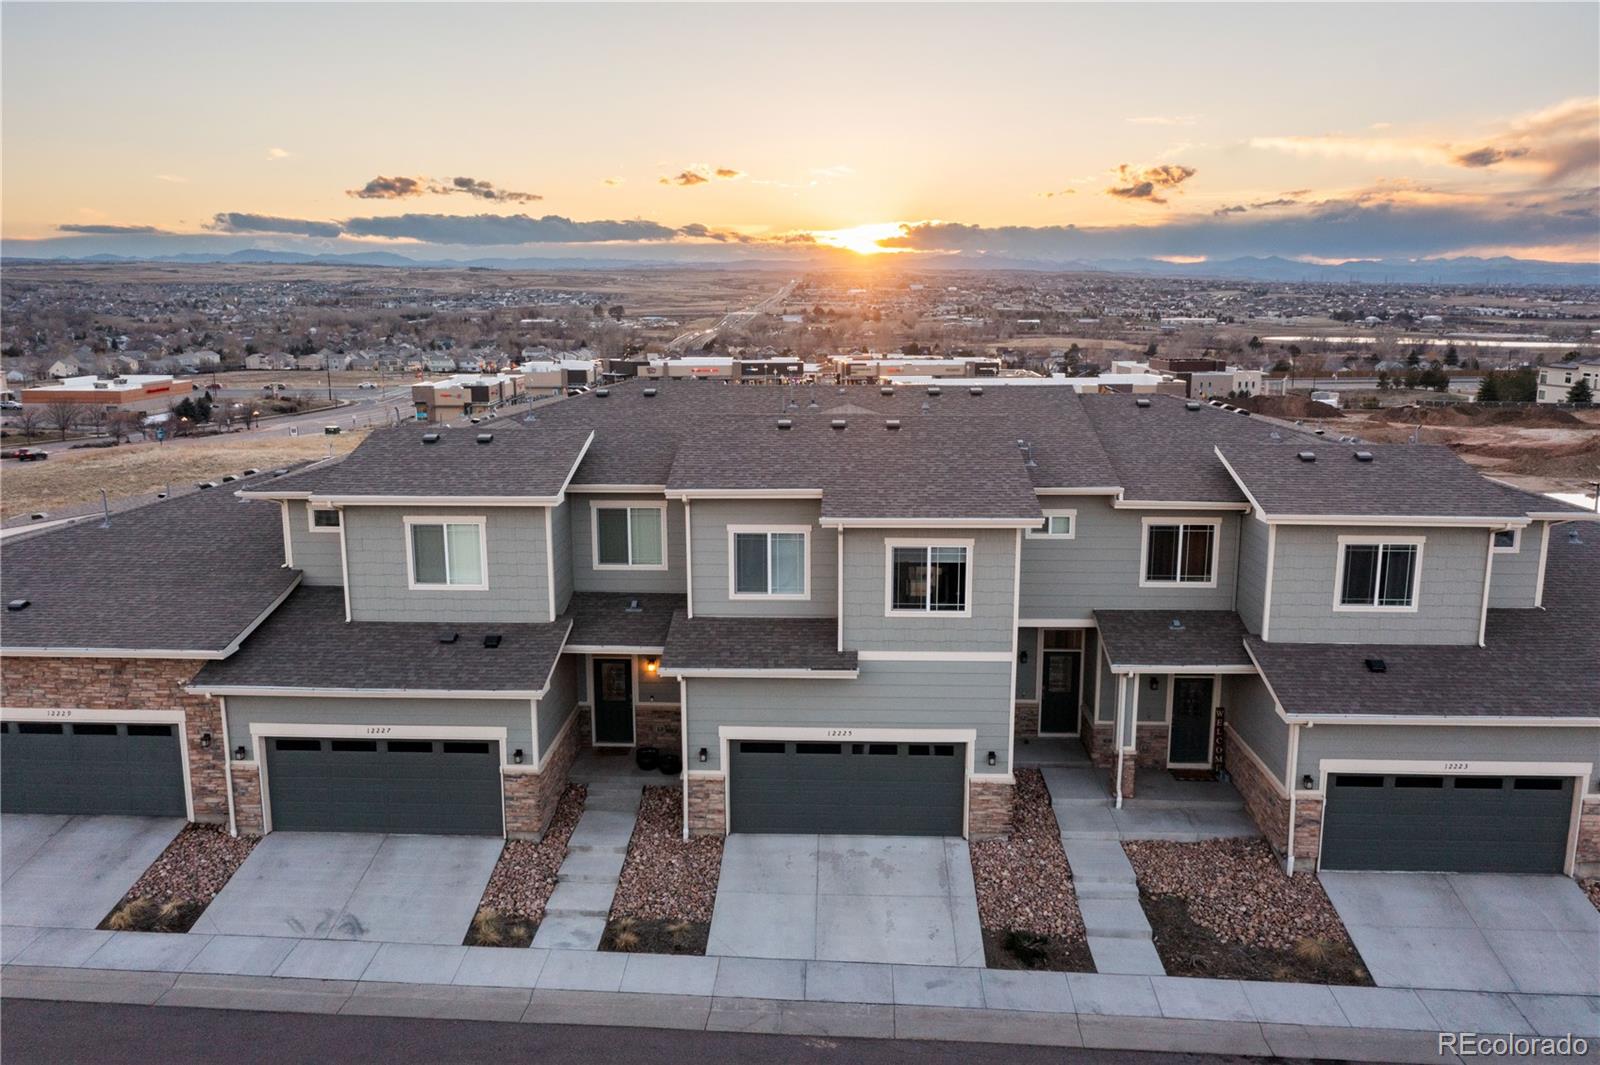 View Parker, CO 80134 townhome